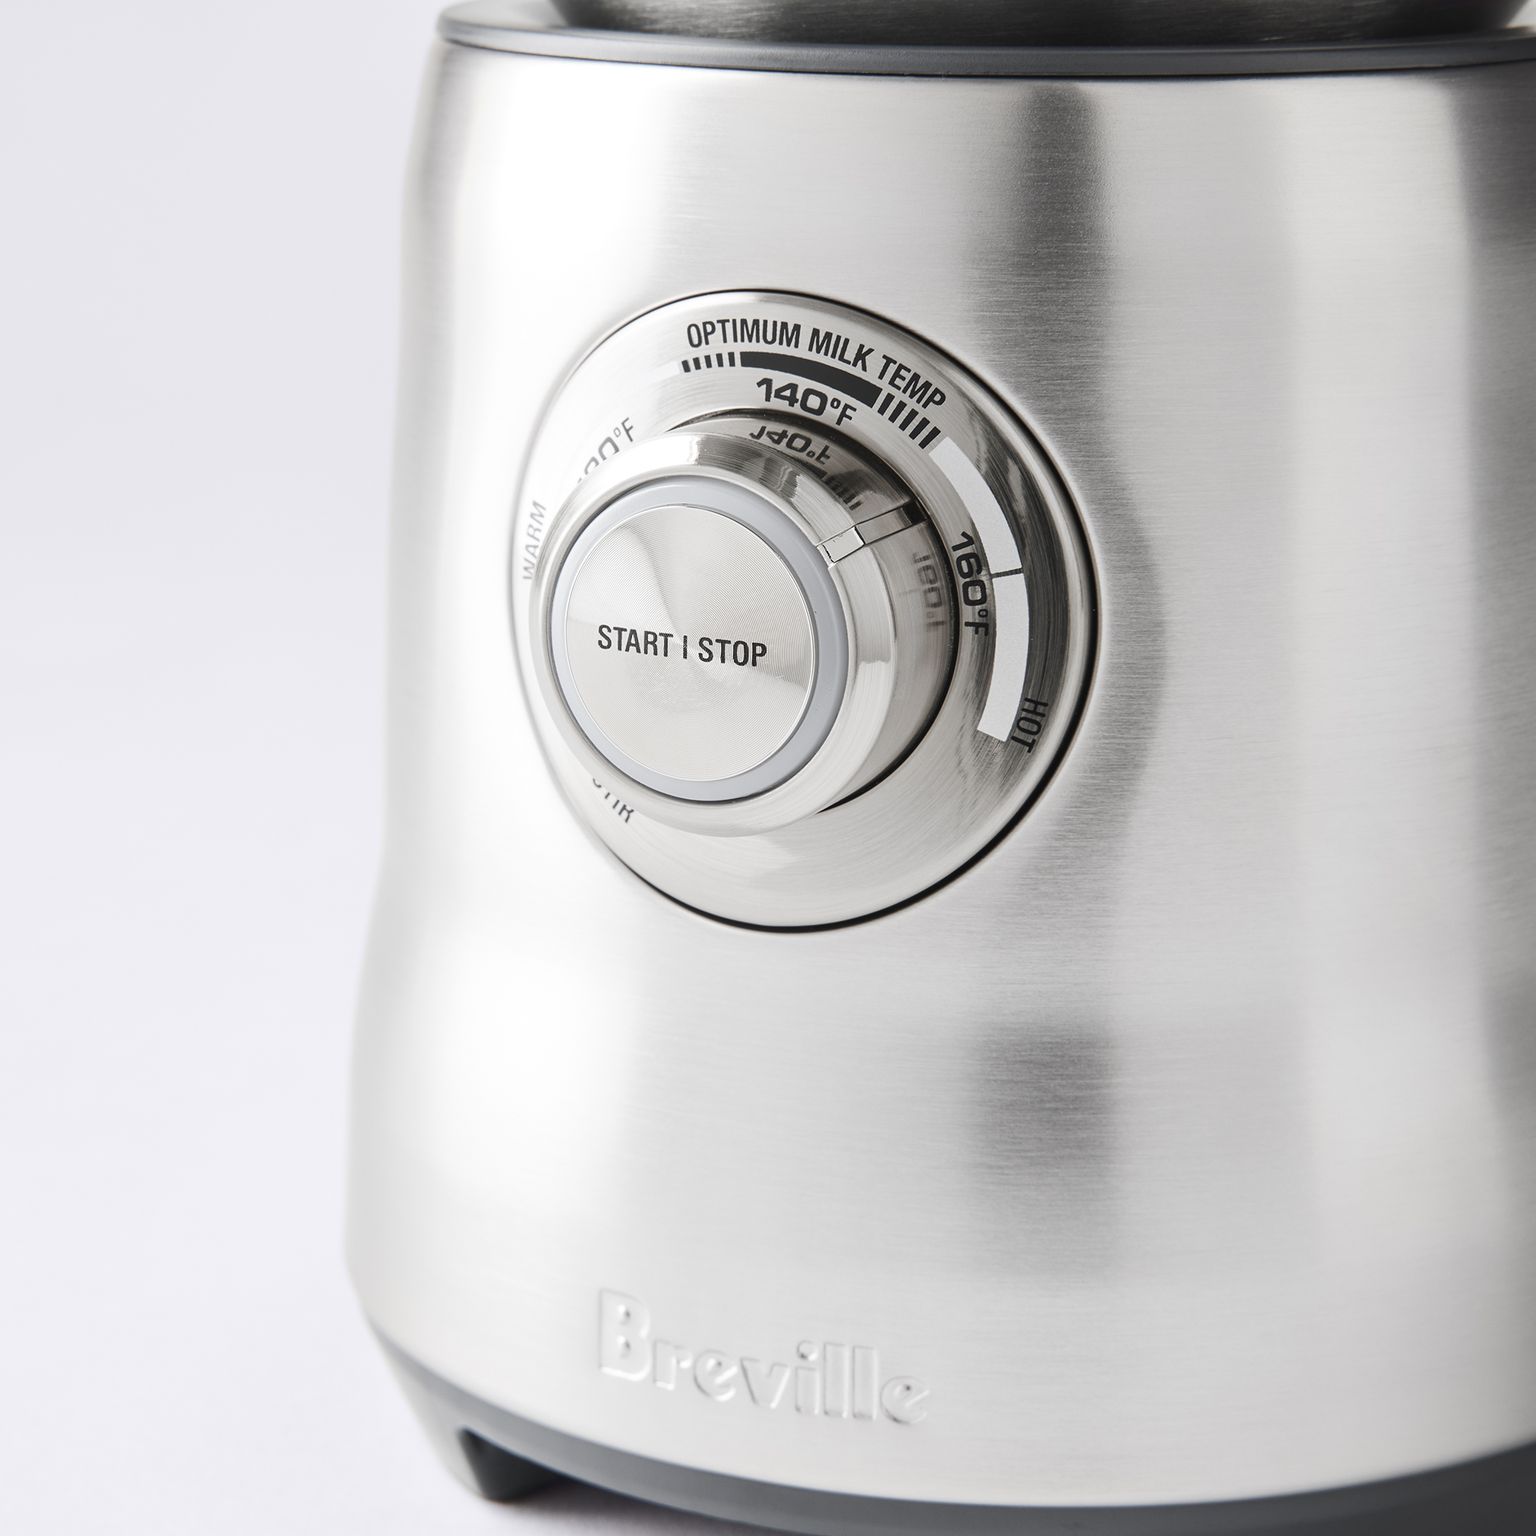 Breville Milk Cafe Frother Review: Should You Buy It?